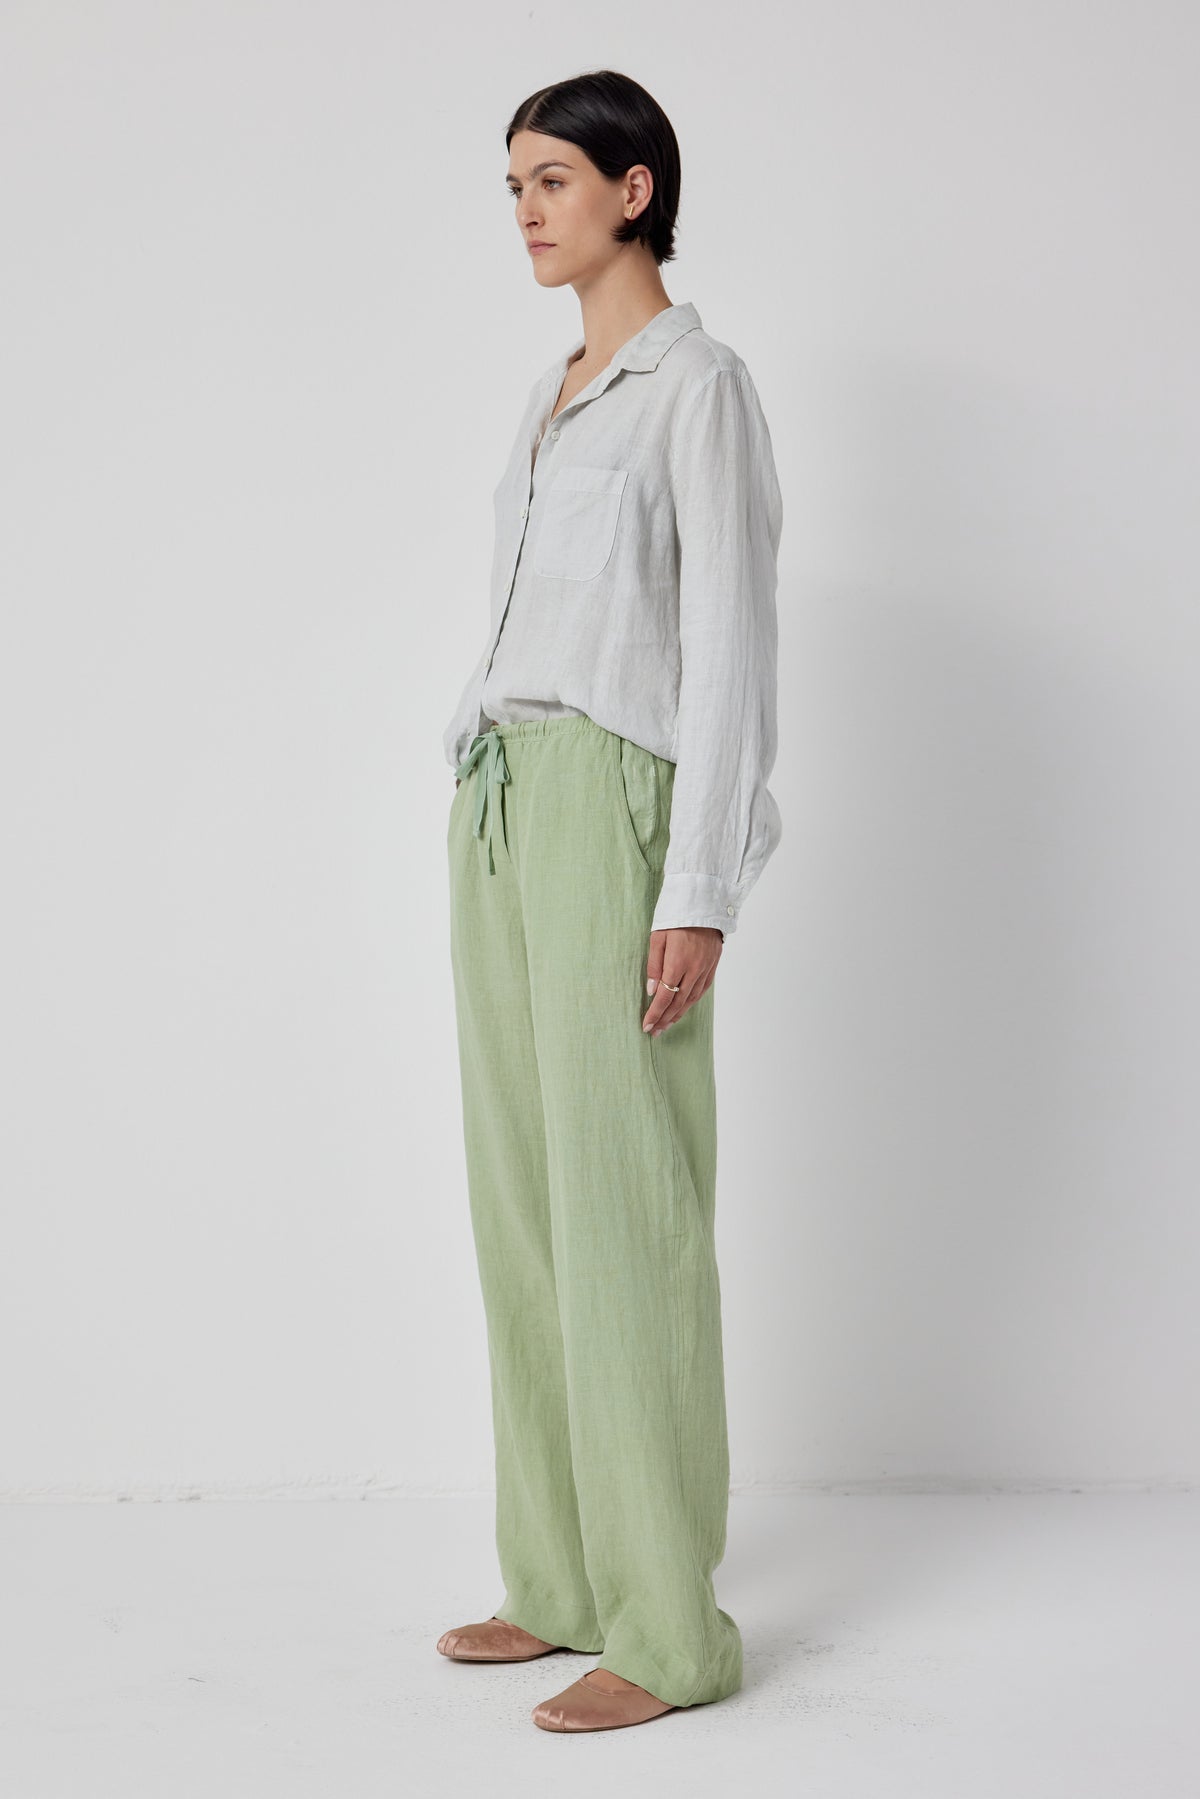 Woman wearing a casual white shirt and PICO PANT by Velvet by Jenny Graham, standing against a plain background.-36219023098049